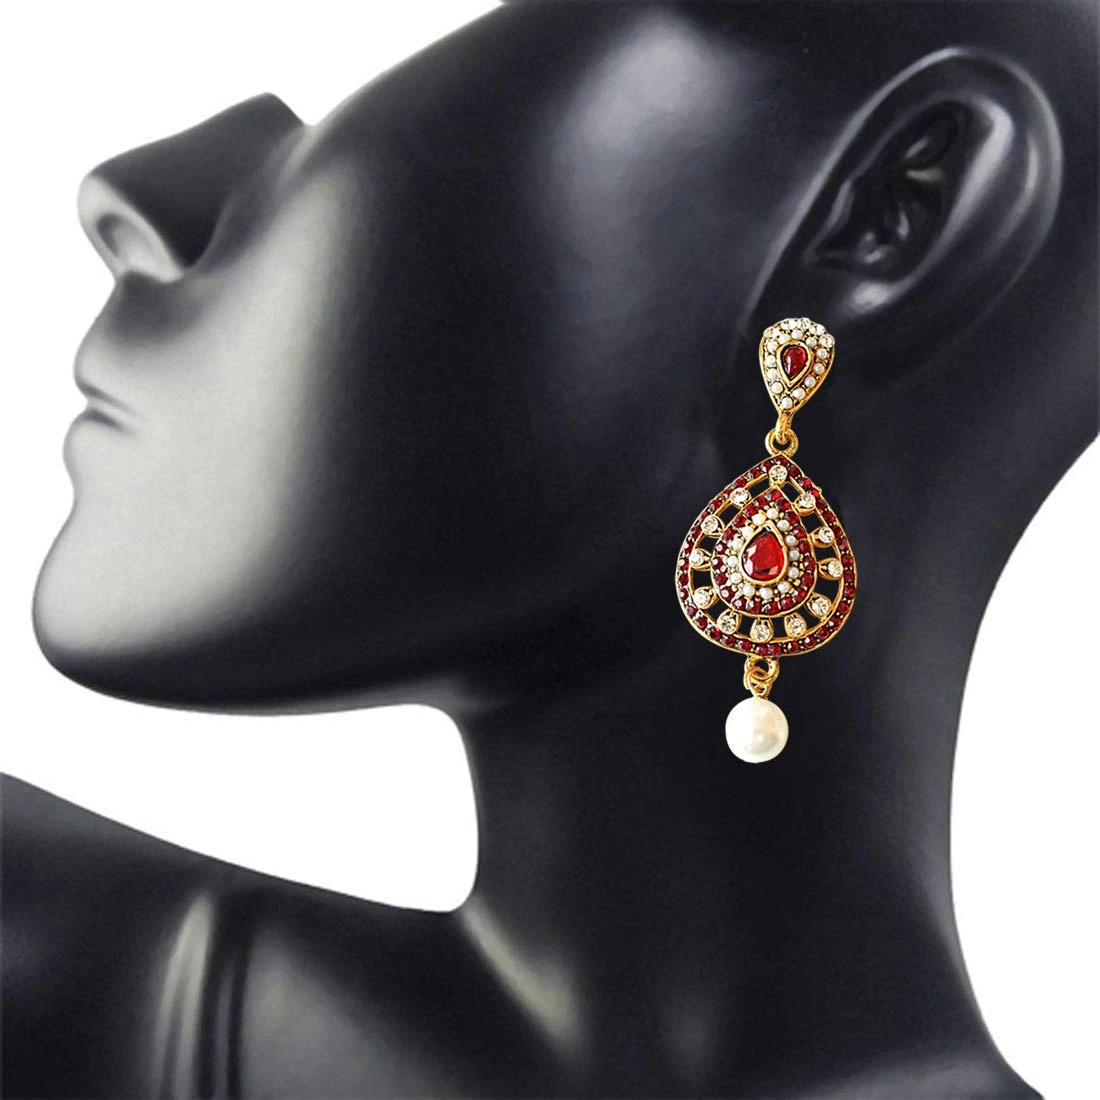 Drop Shaped Red & White Coloured Stone, Shell Pearl & Gold Plated Ch Bali Earrings